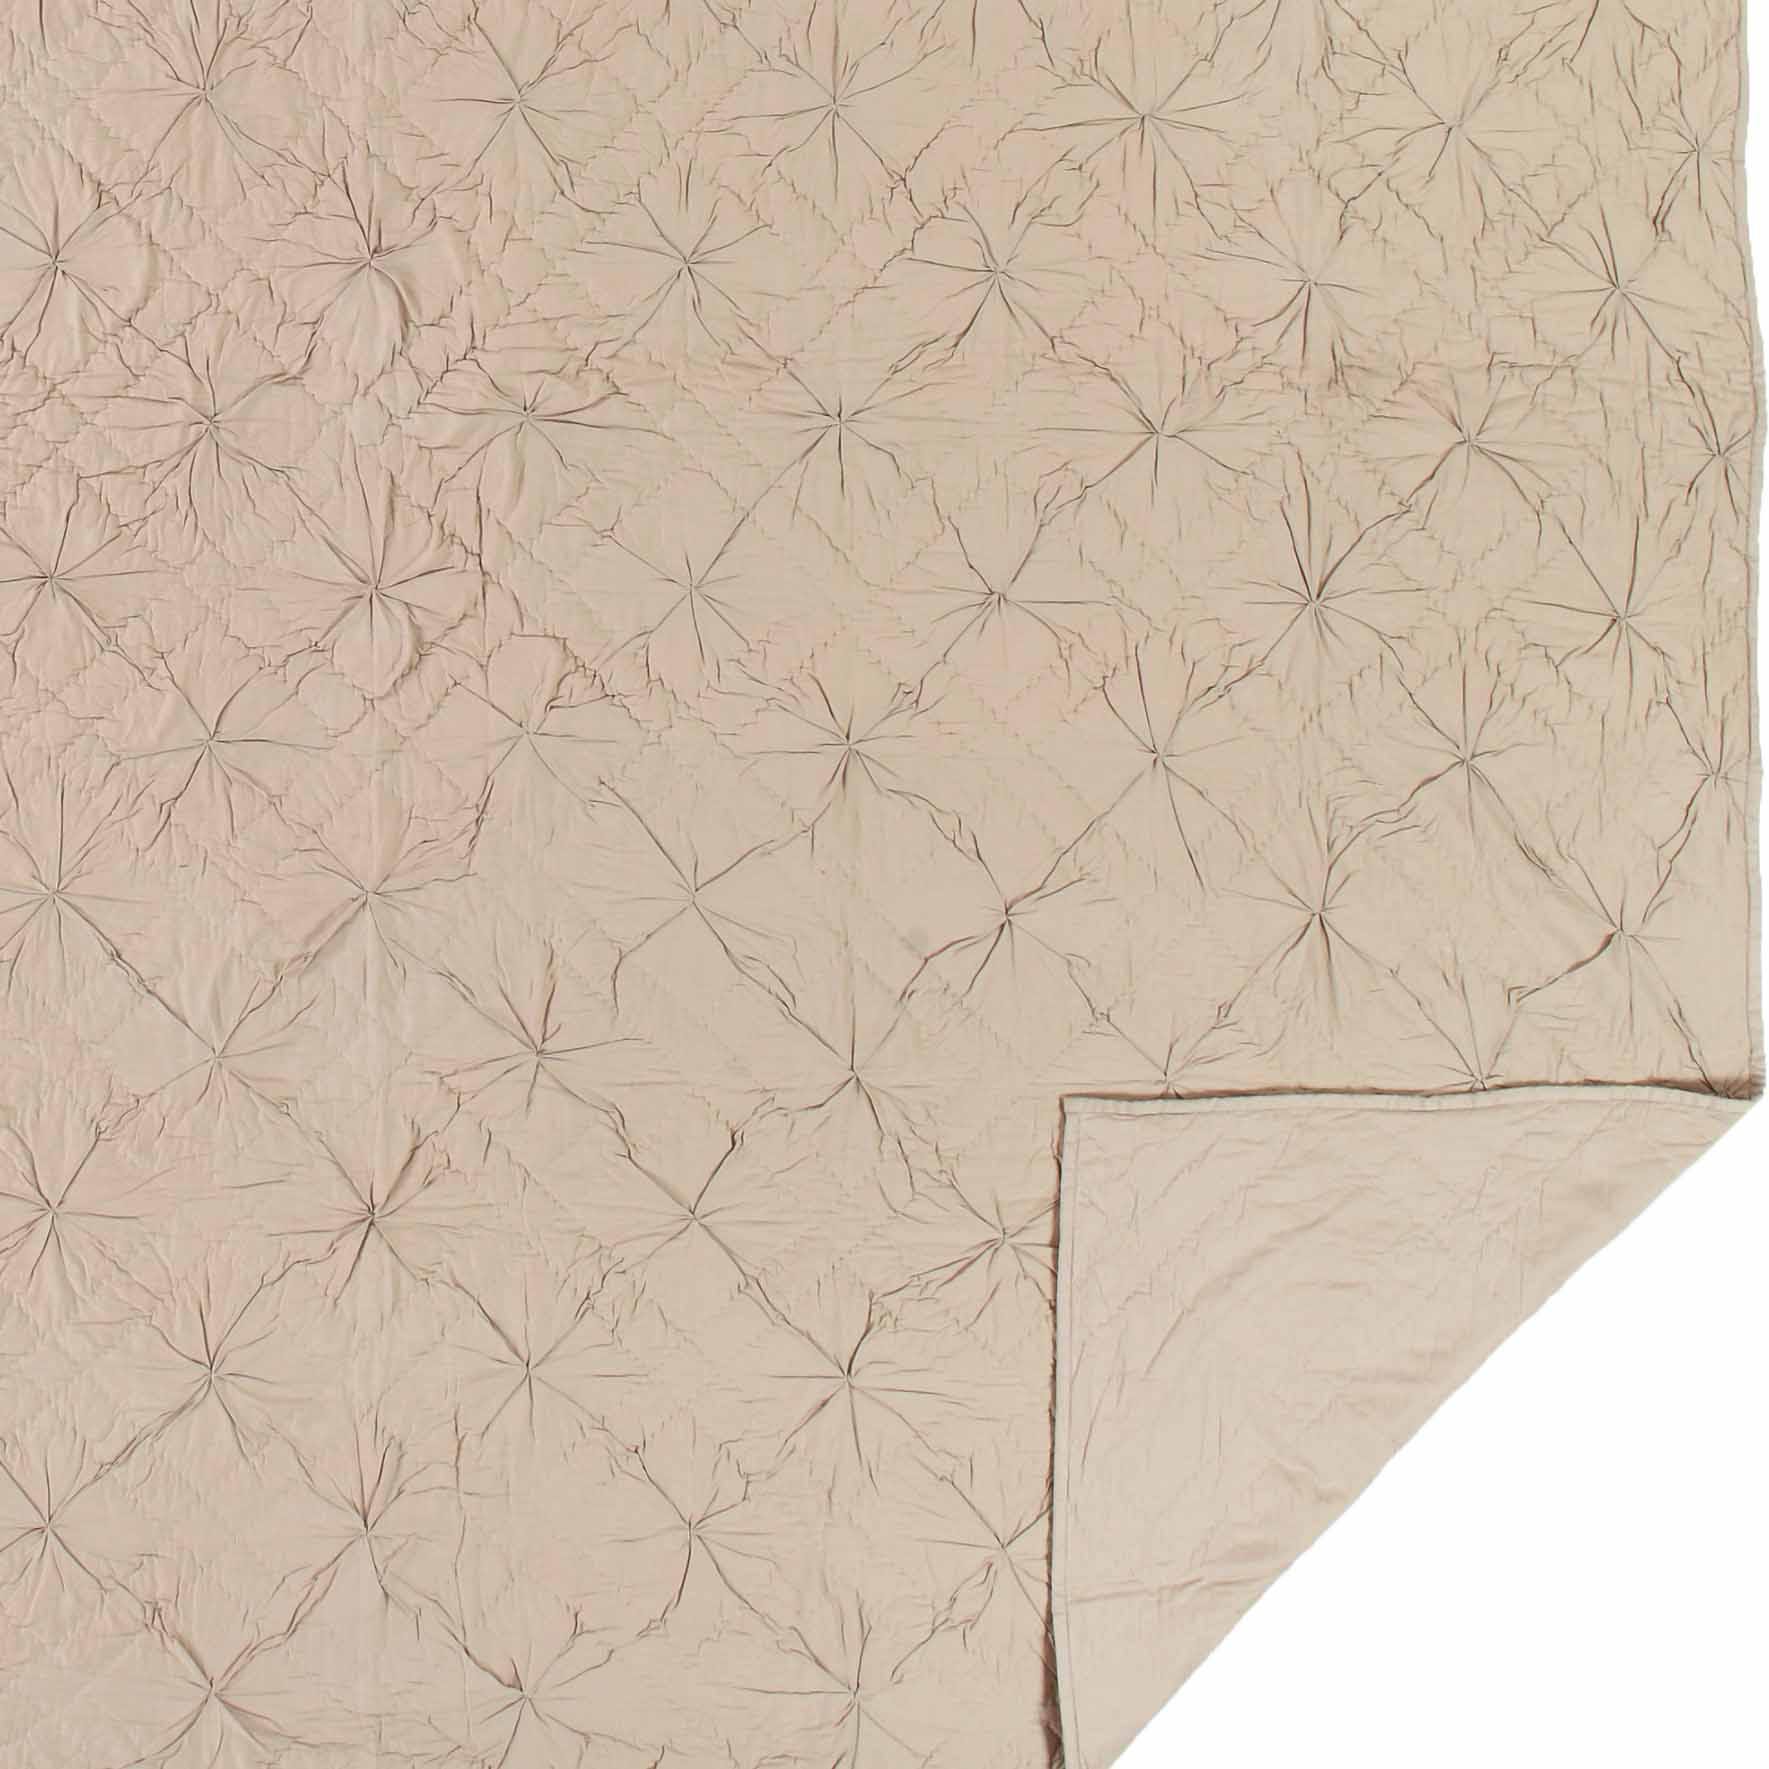 Aubree Taupe Queen Quilt 92Wx92L VHC Brands - The Fox Decor